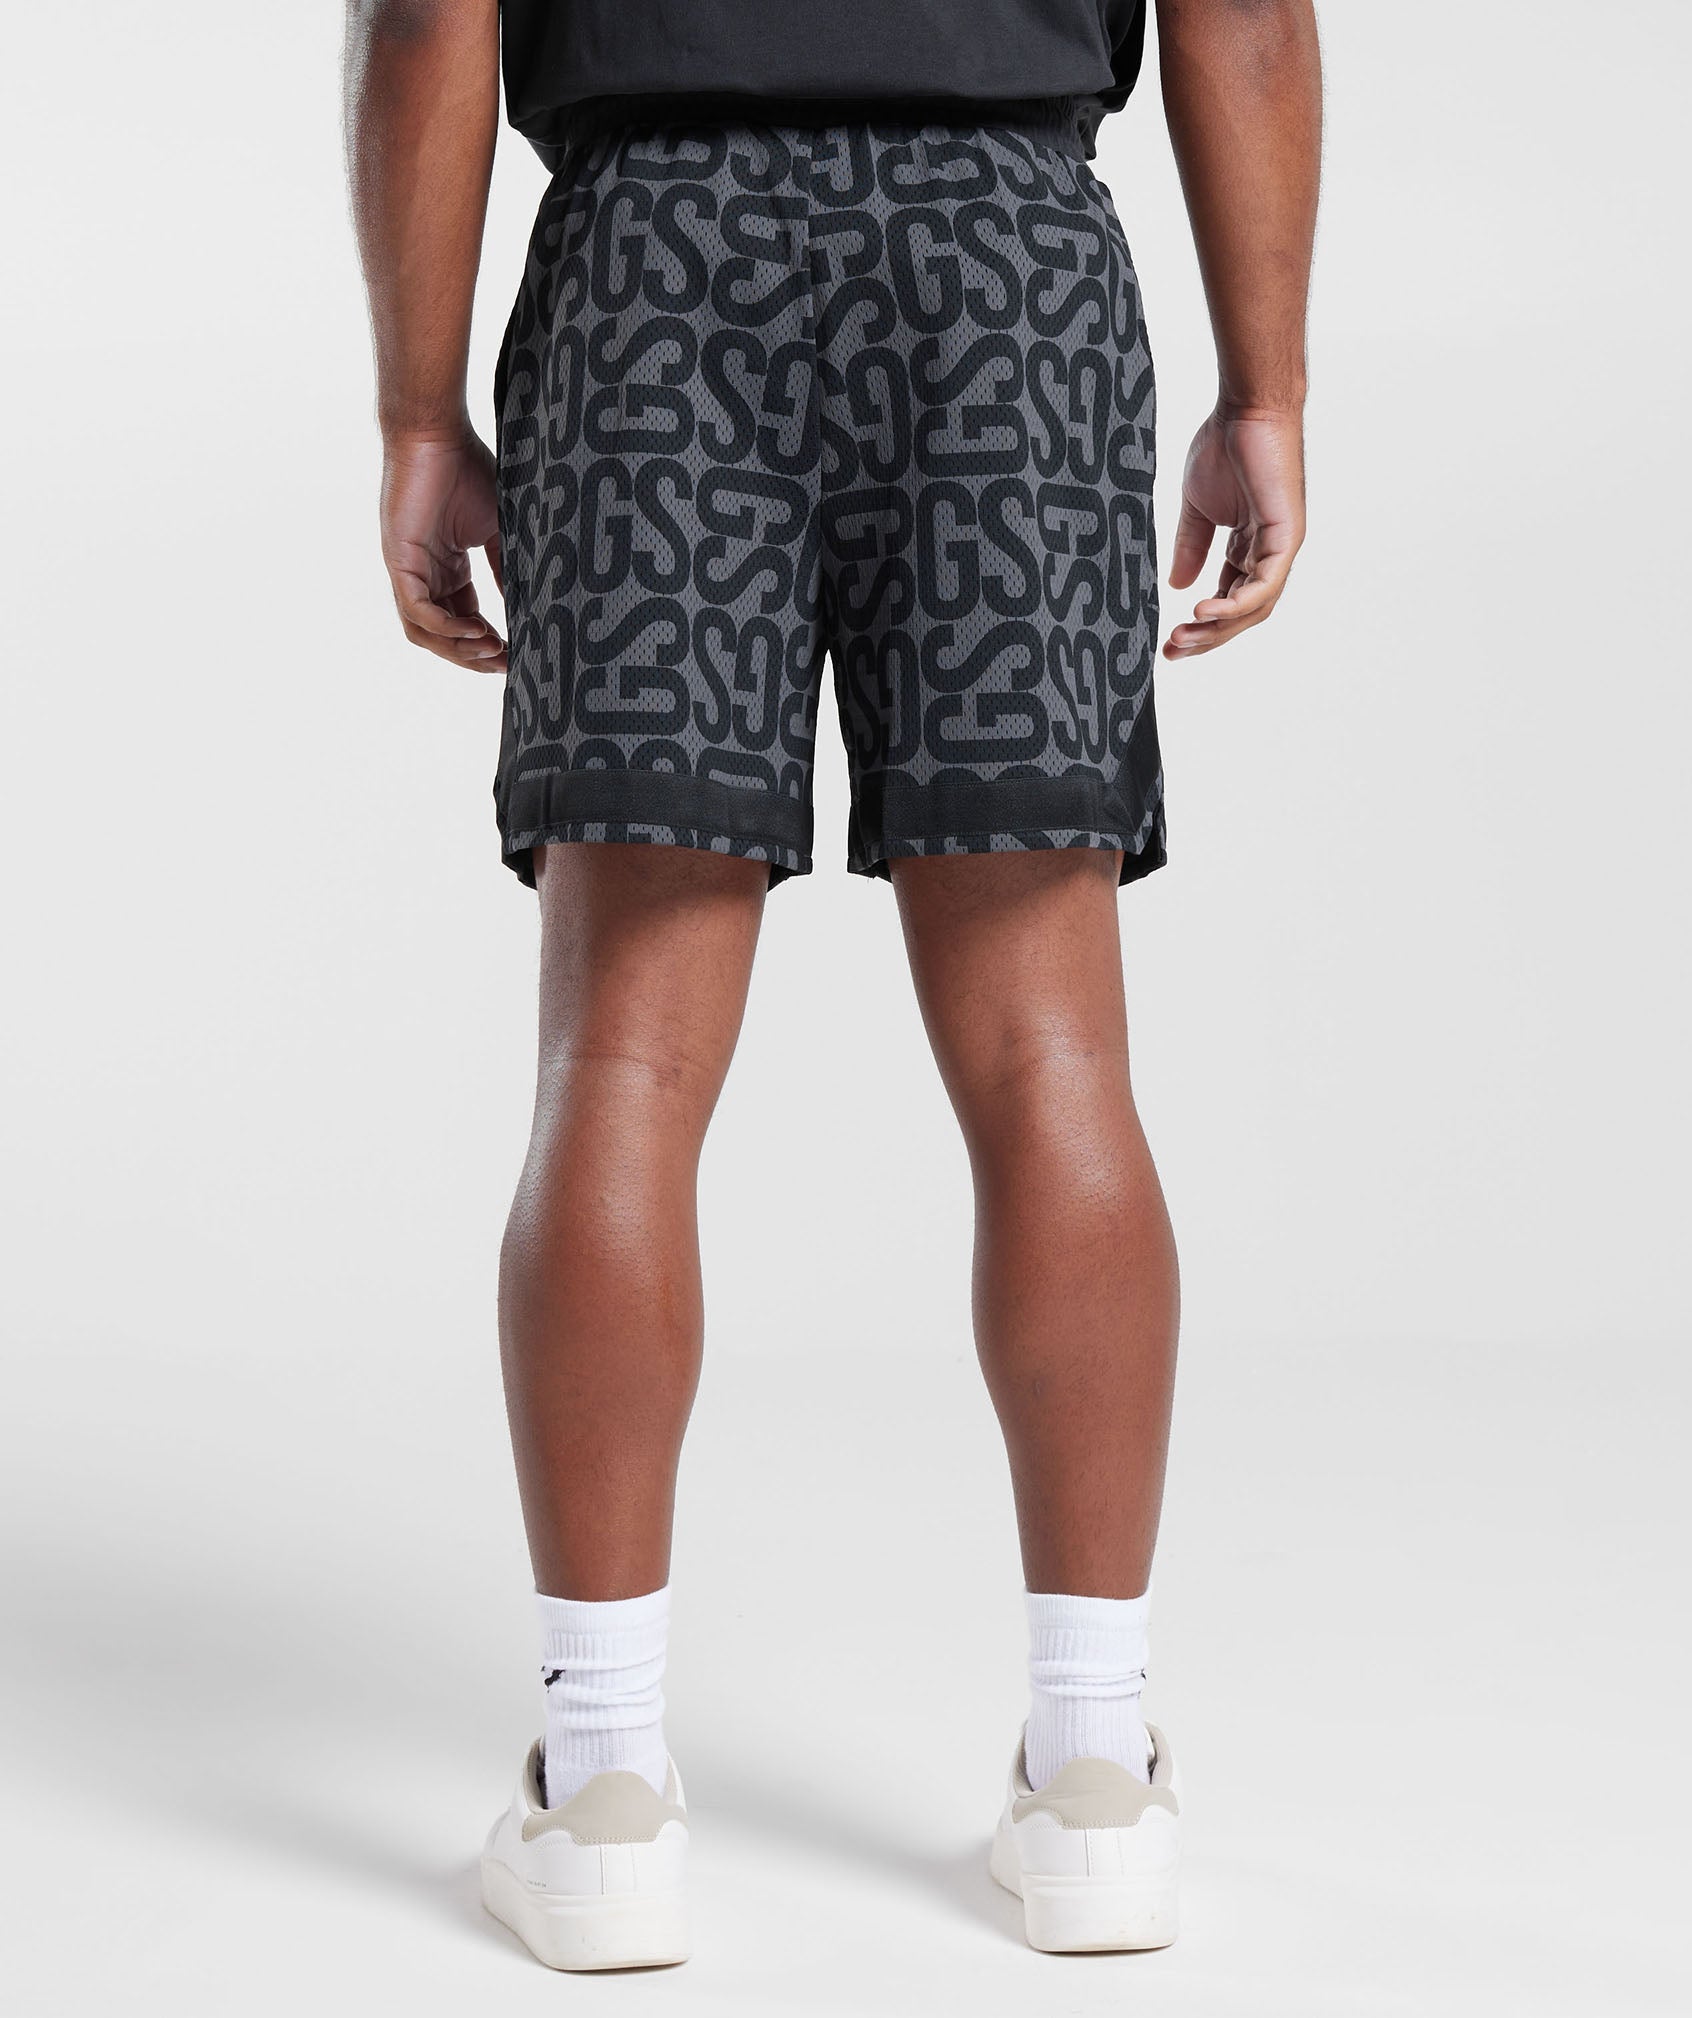 Rest Day Shorts in Black/Onyx Grey - view 1